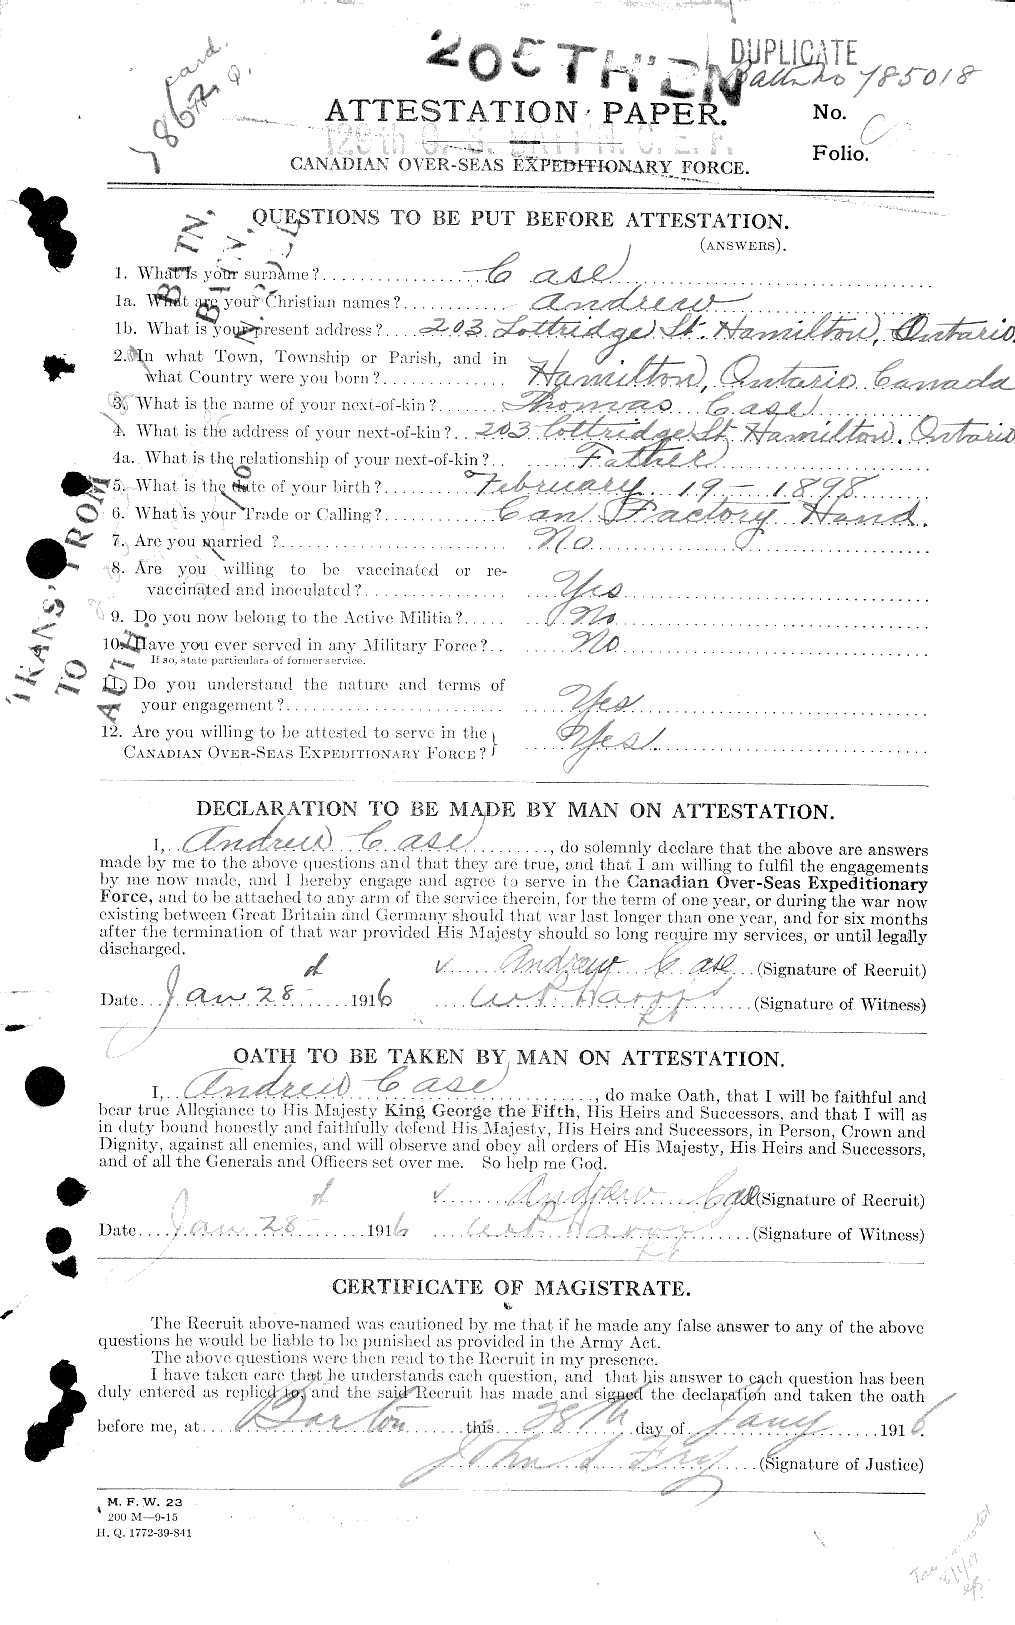 Personnel Records of the First World War - CEF 011713a